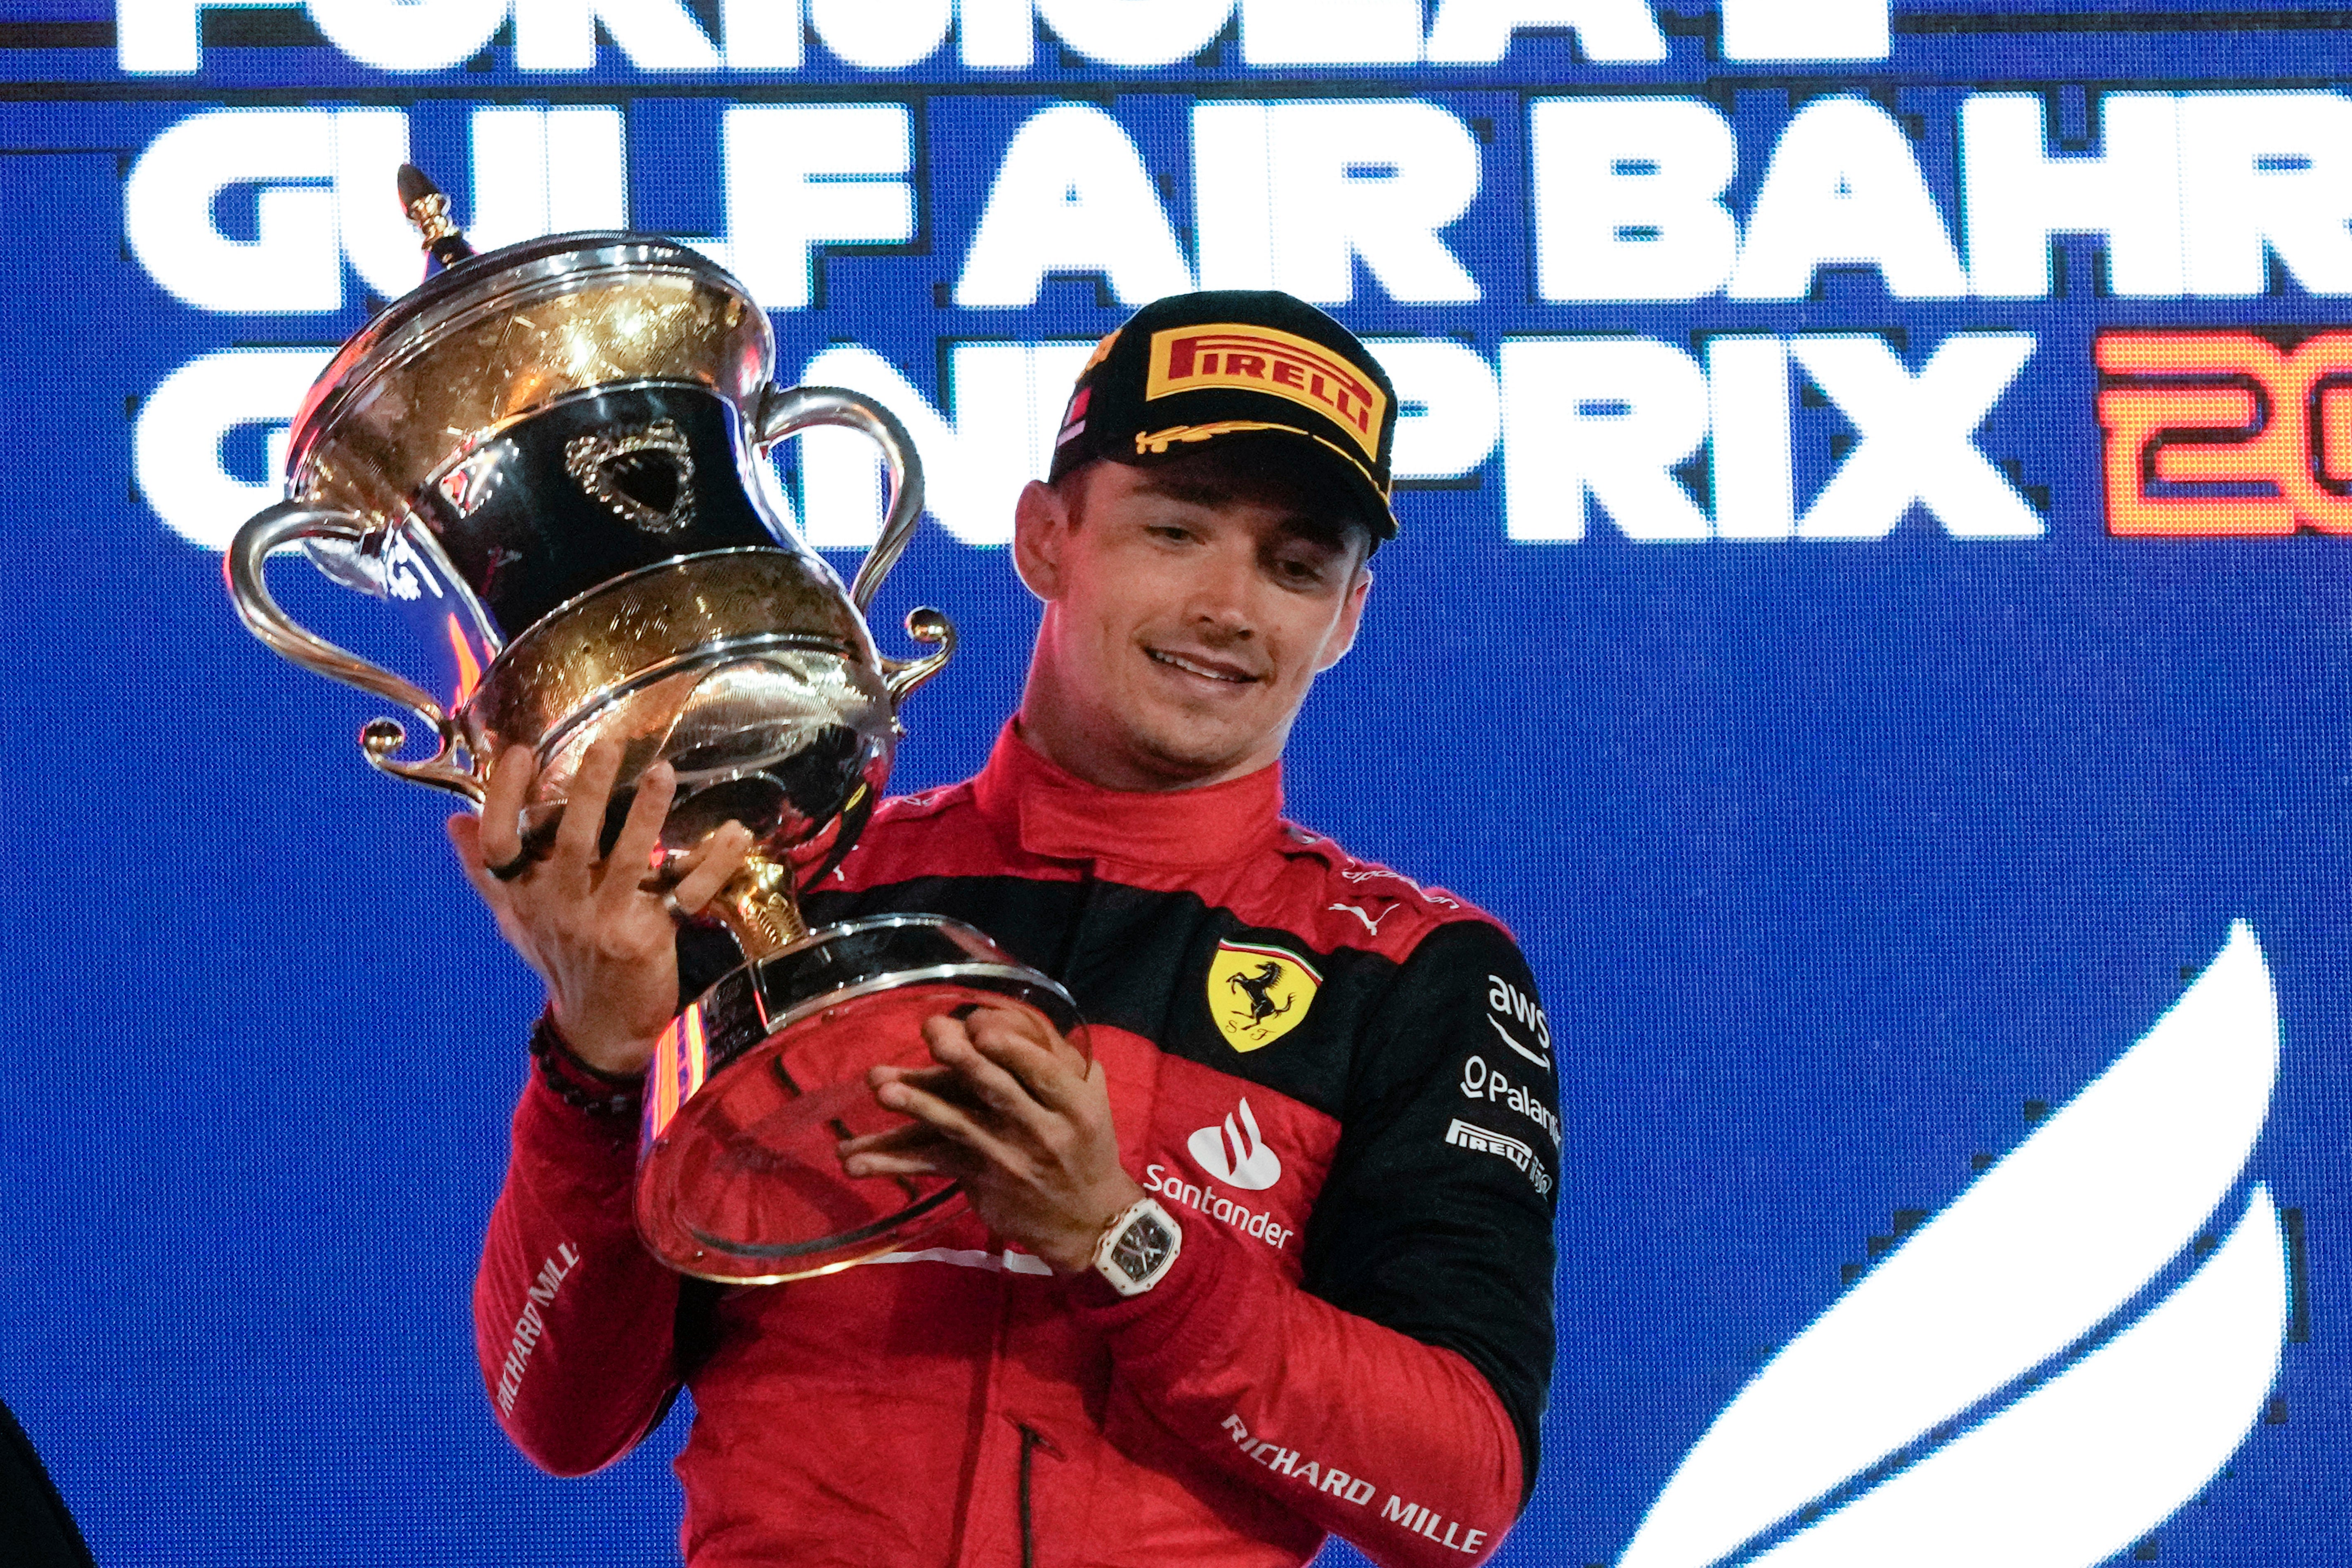 Charles Leclerc has finished first and second in the opening two races of the 2022 season